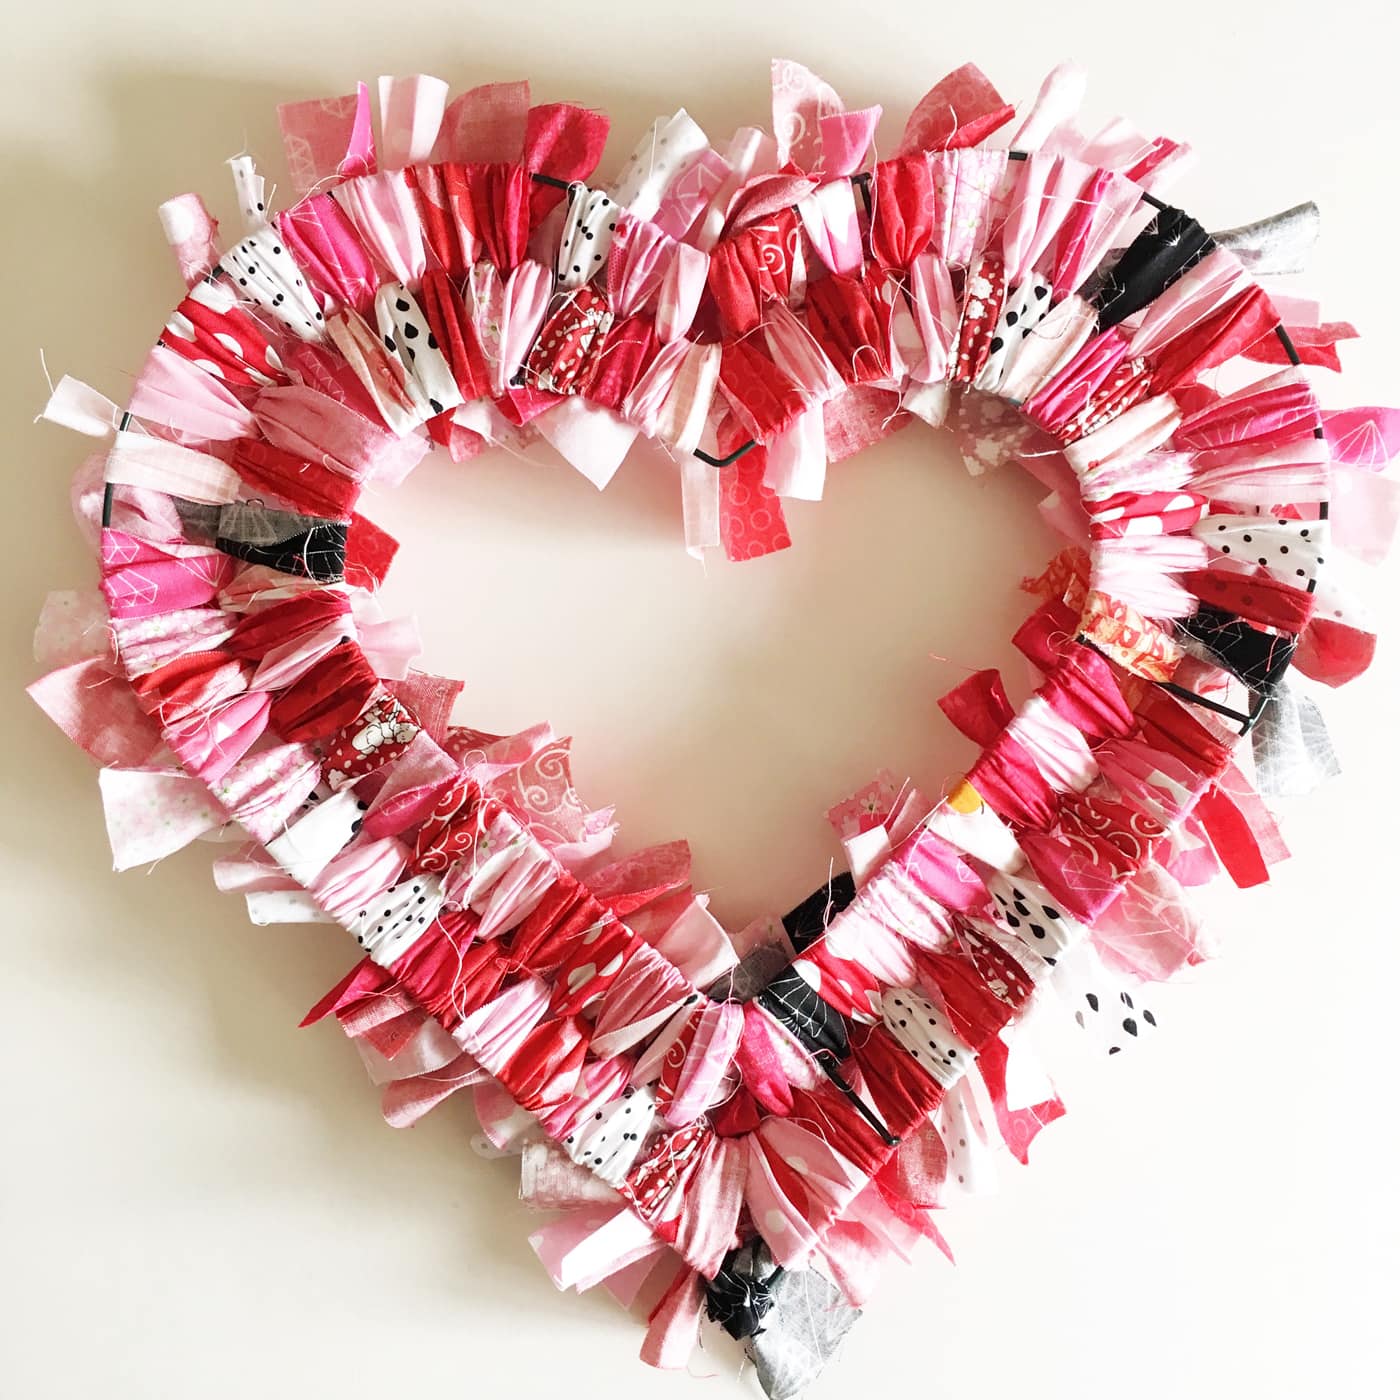 Make a Tattered Fabric Heart Wreath - DIY Beautify - Creating Beauty at Home